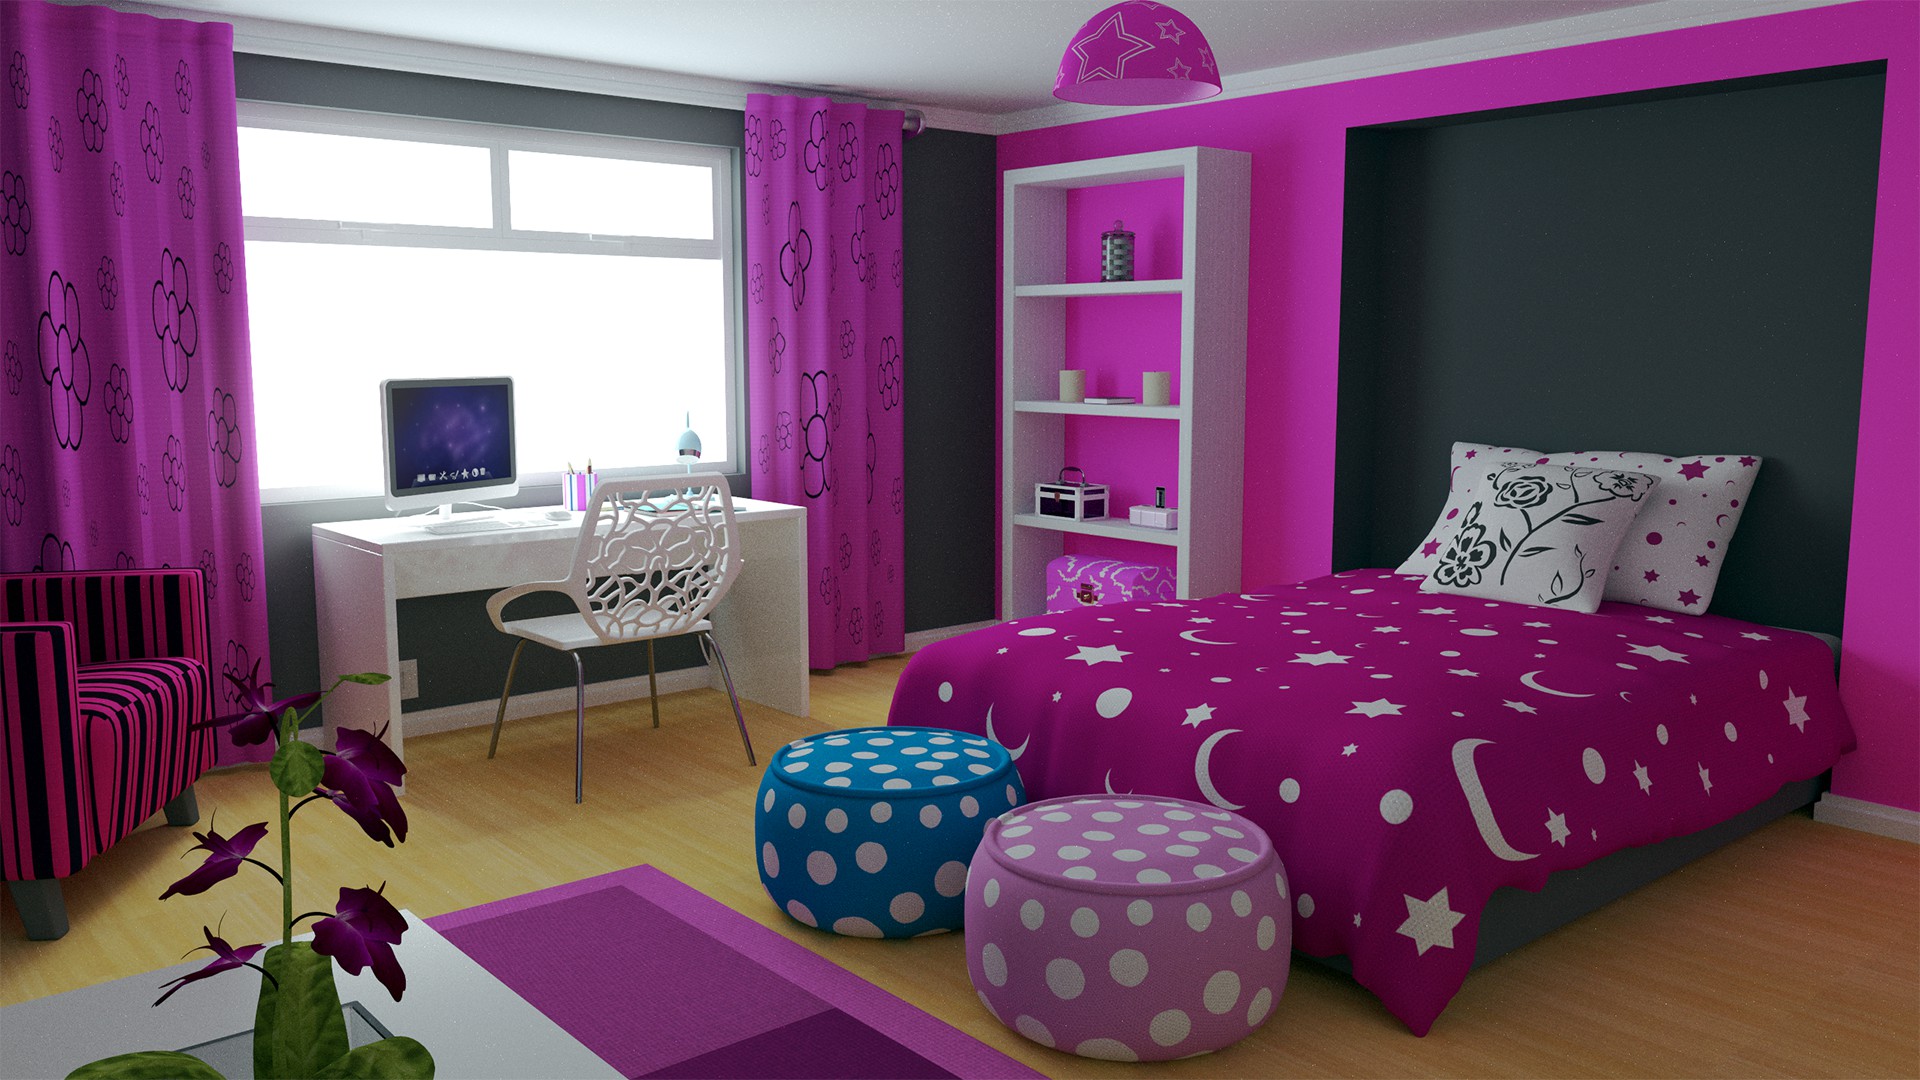 Wallpaper design for kids room in pink saturated color.